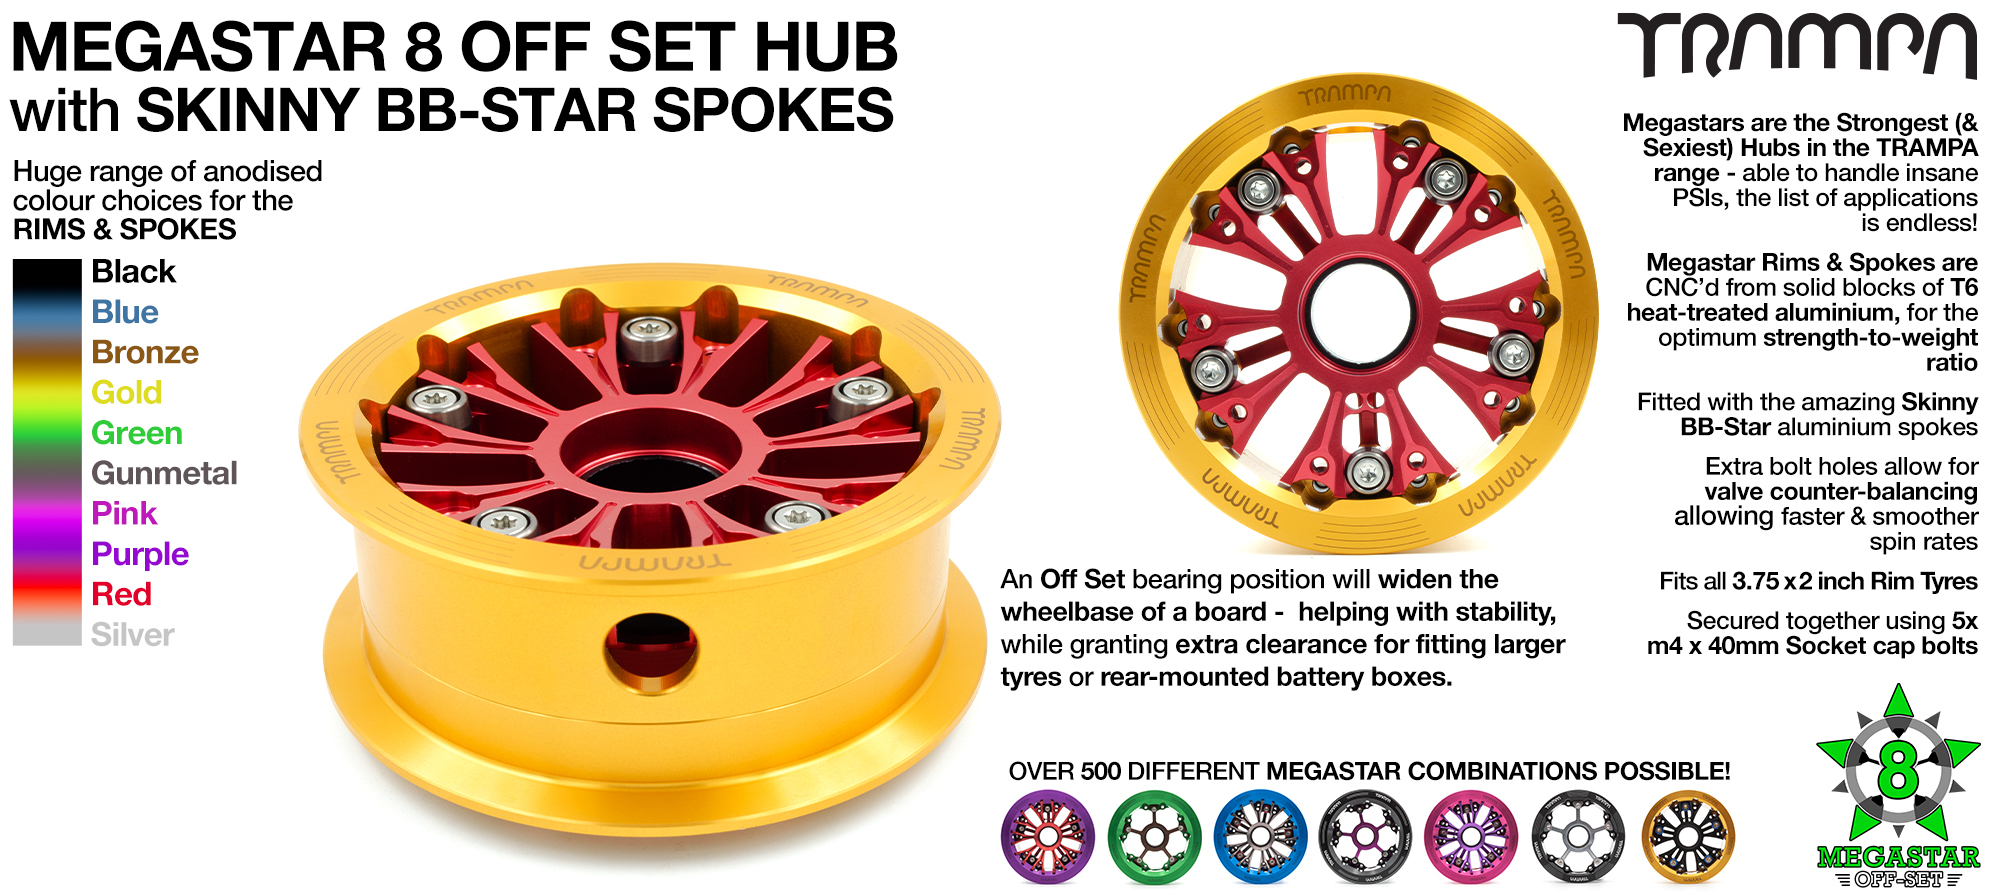 OFF-SET MEGASTAR 8 Hub with CLASSIC Spokes 3.75 x 2 Inch - Fits all TRAMPA Tyres up to 8 Inch